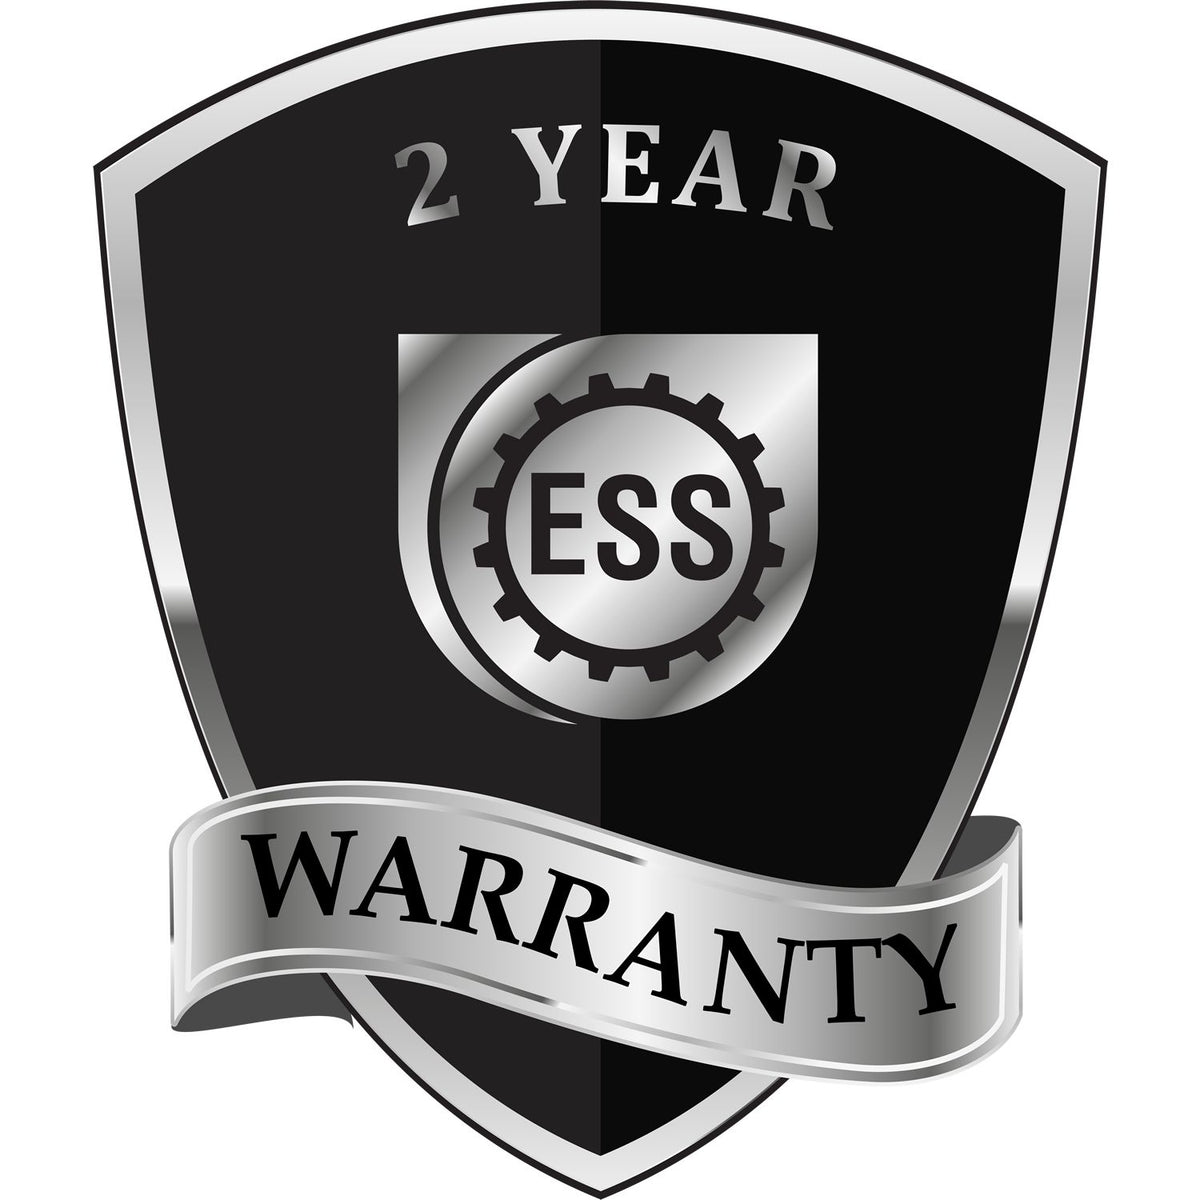 A black and silver badge or emblem showing warranty information for the Hybrid Kansas Engineer Seal